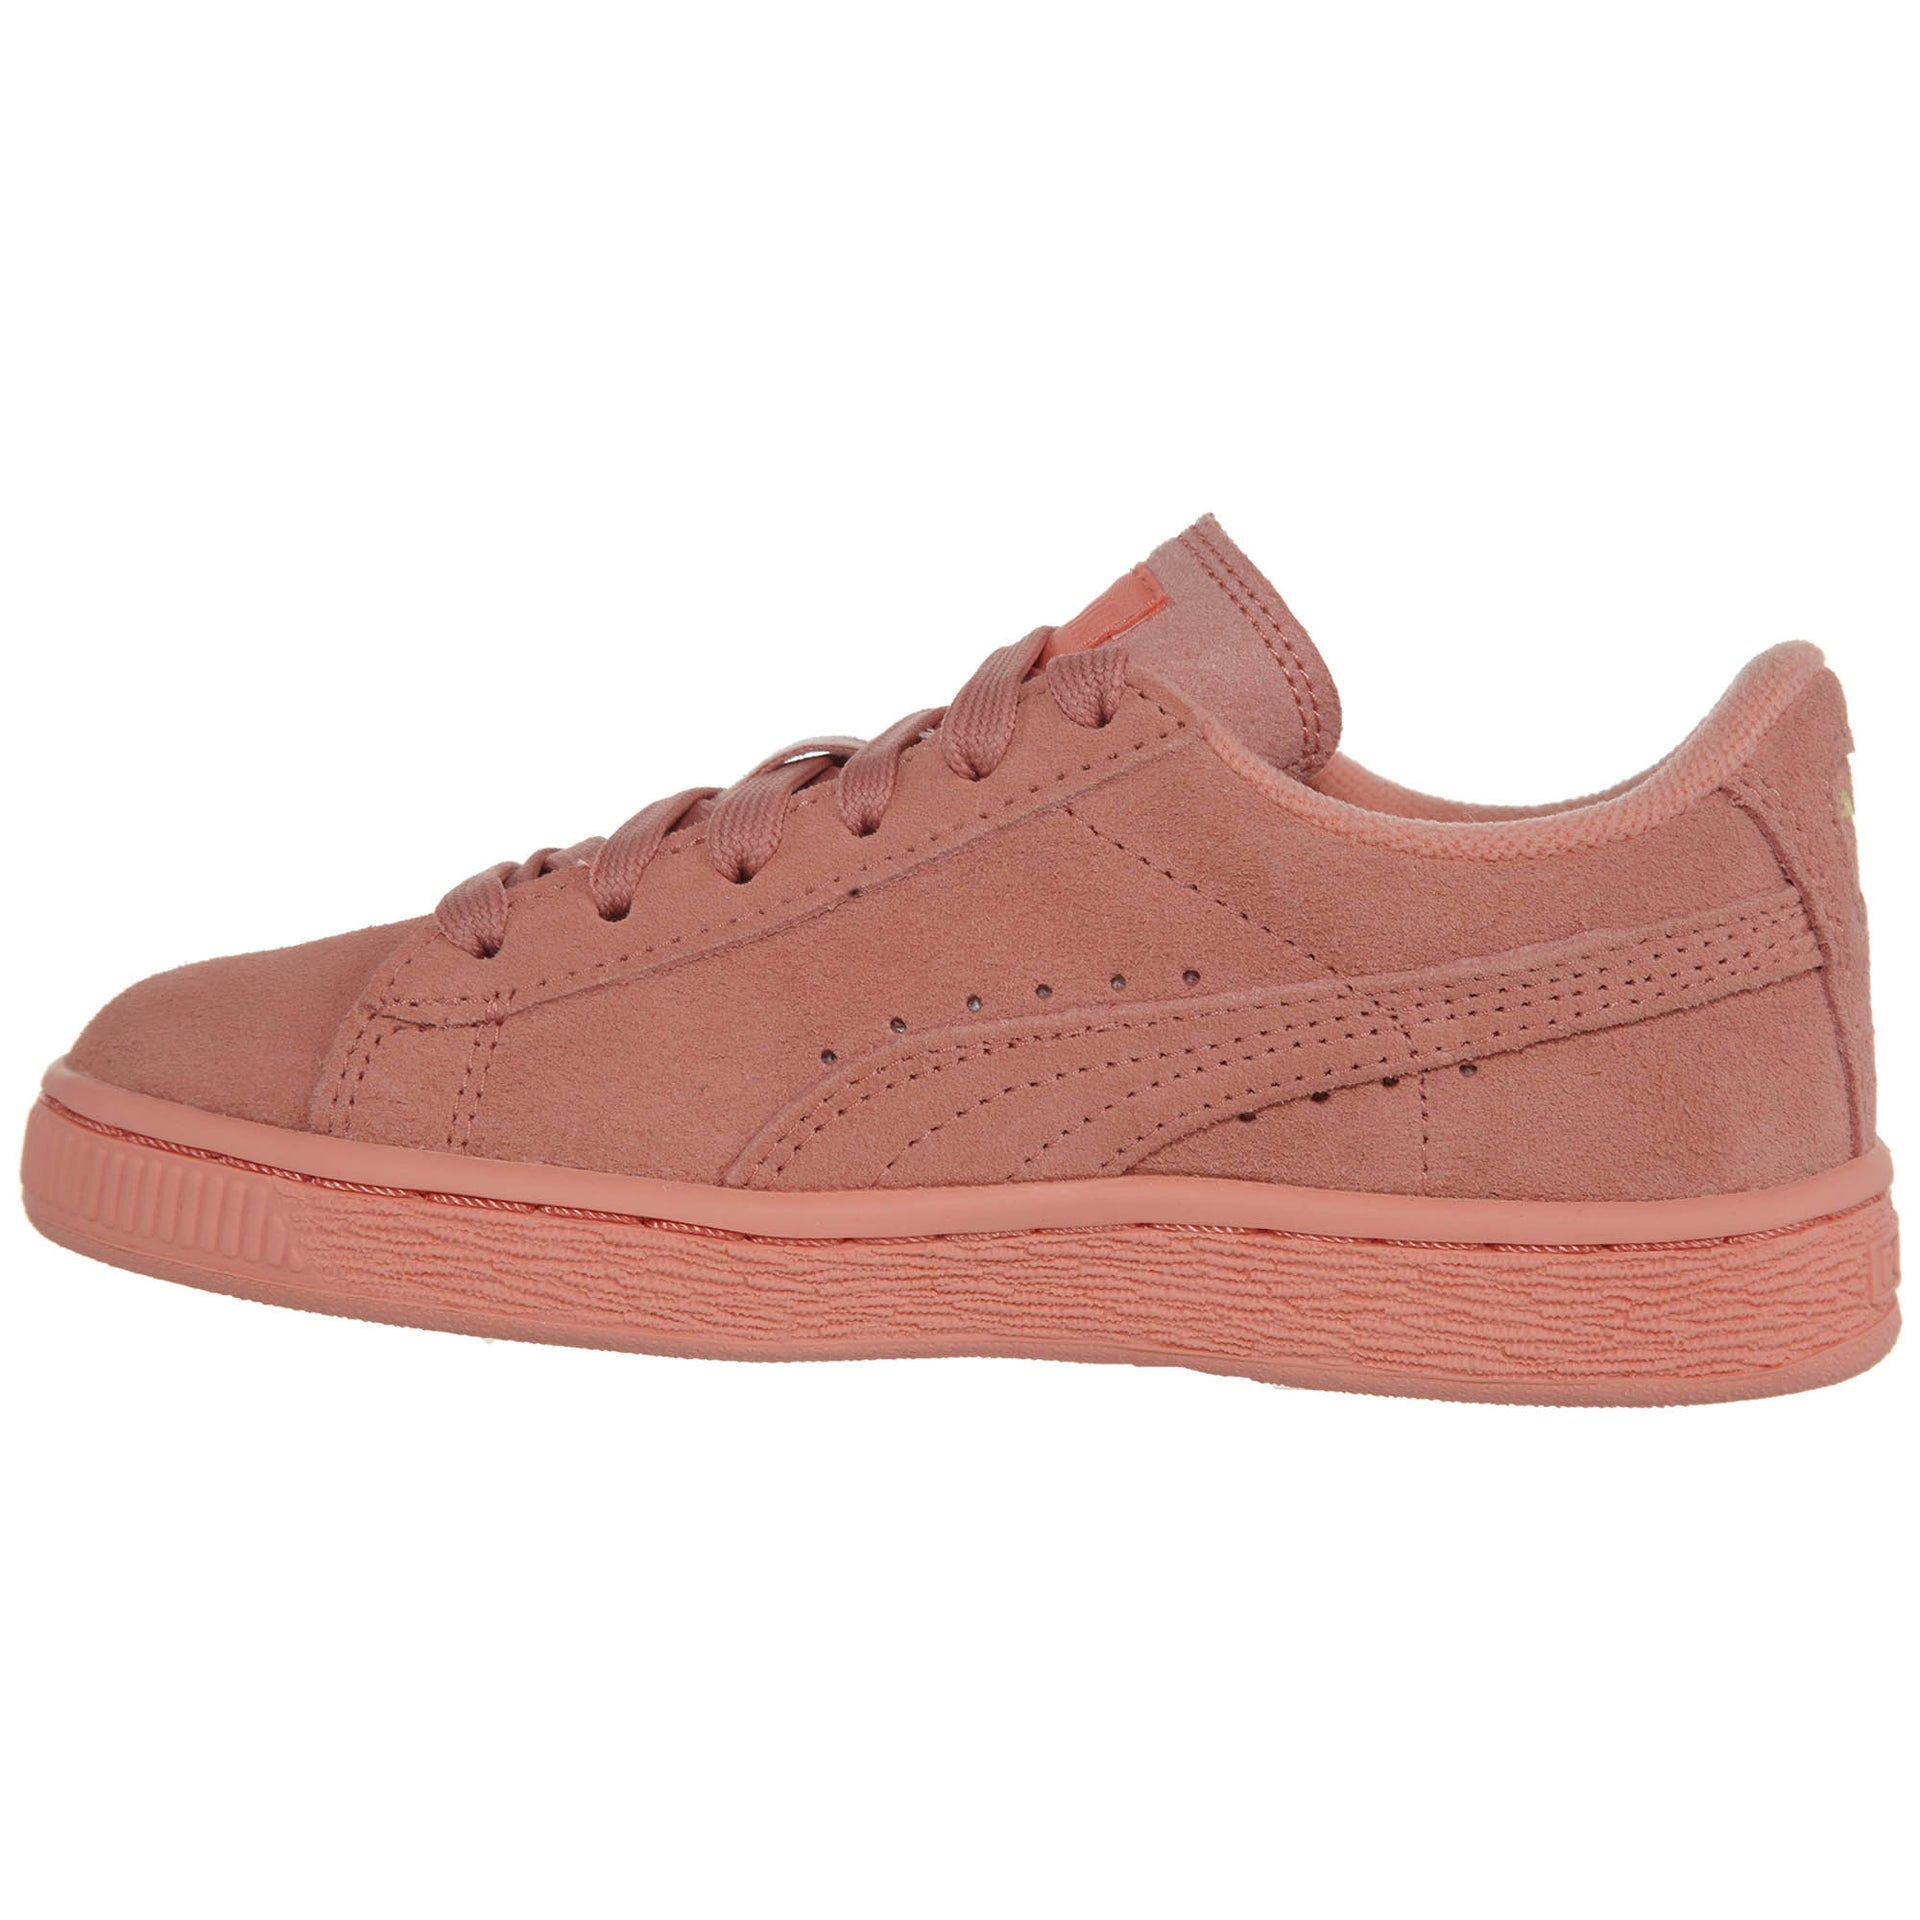 Puma Suede Classic Toddlers Style : 353636